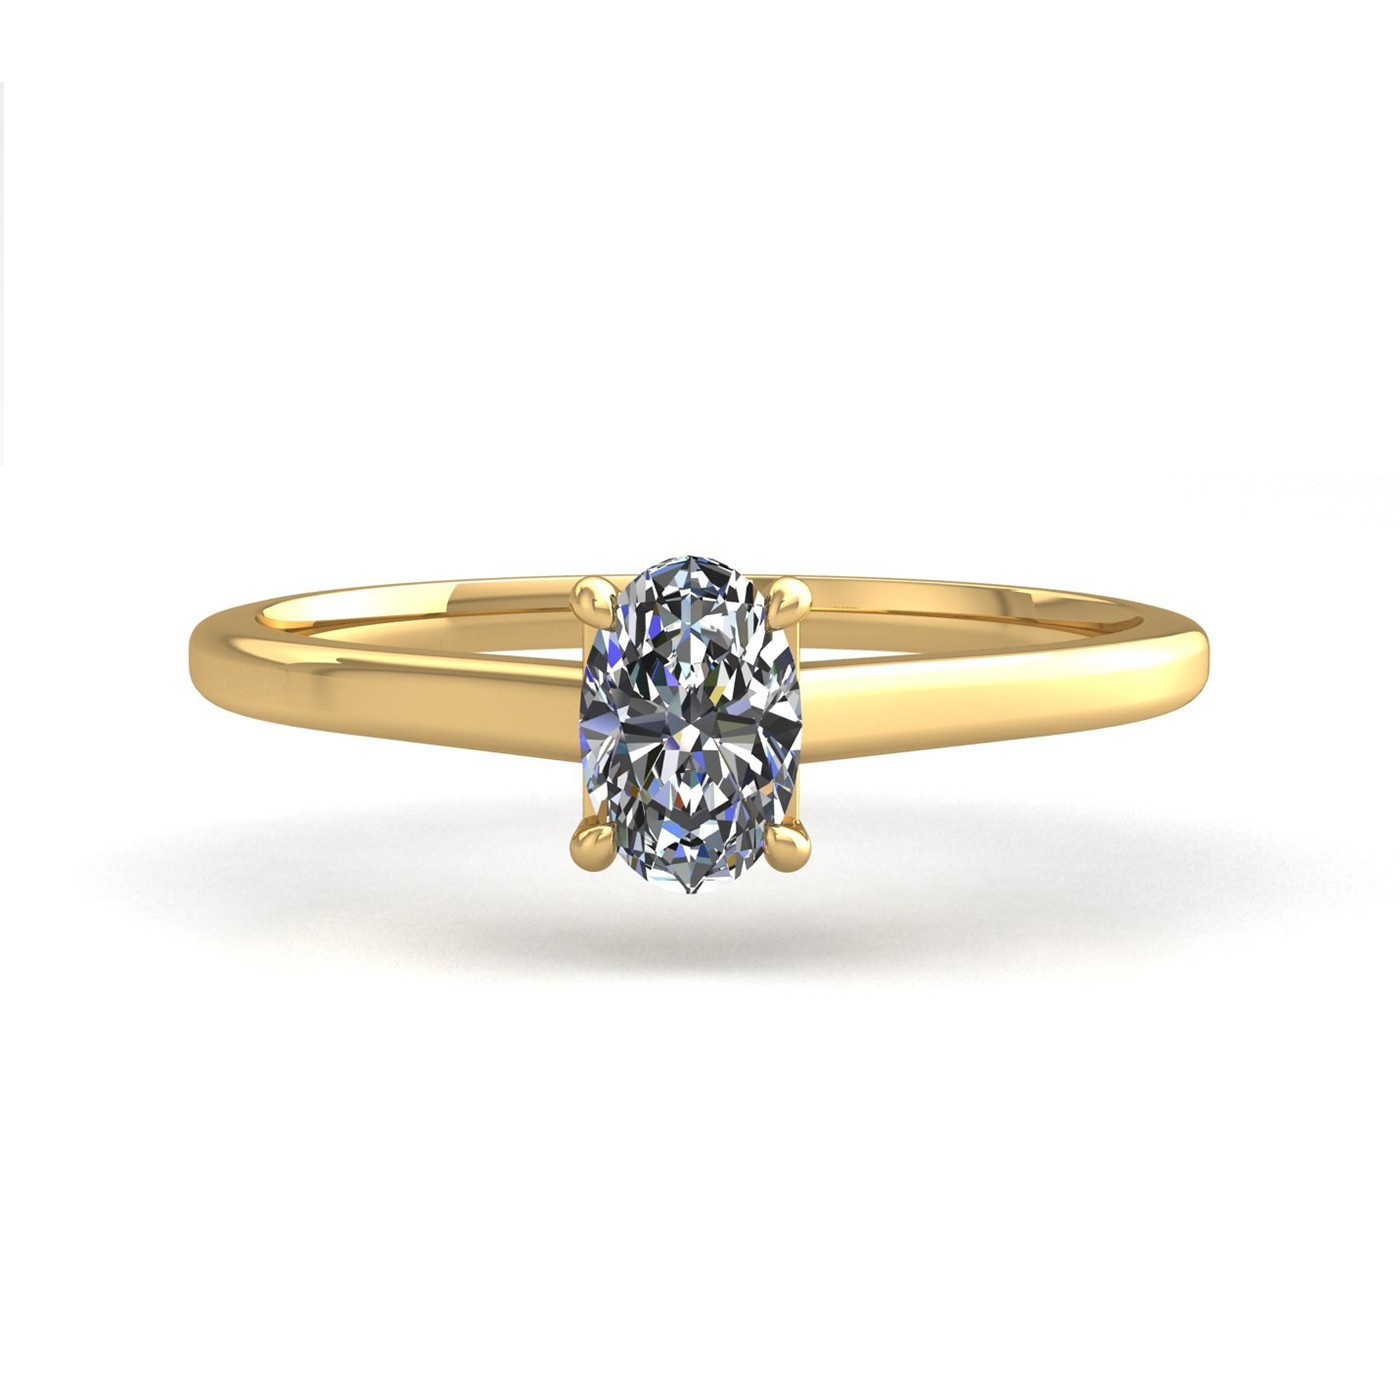 18k yellow gold  1,50 ct 4 prongs solitaire oval cut diamond engagement ring with whisper thin band Photos & images